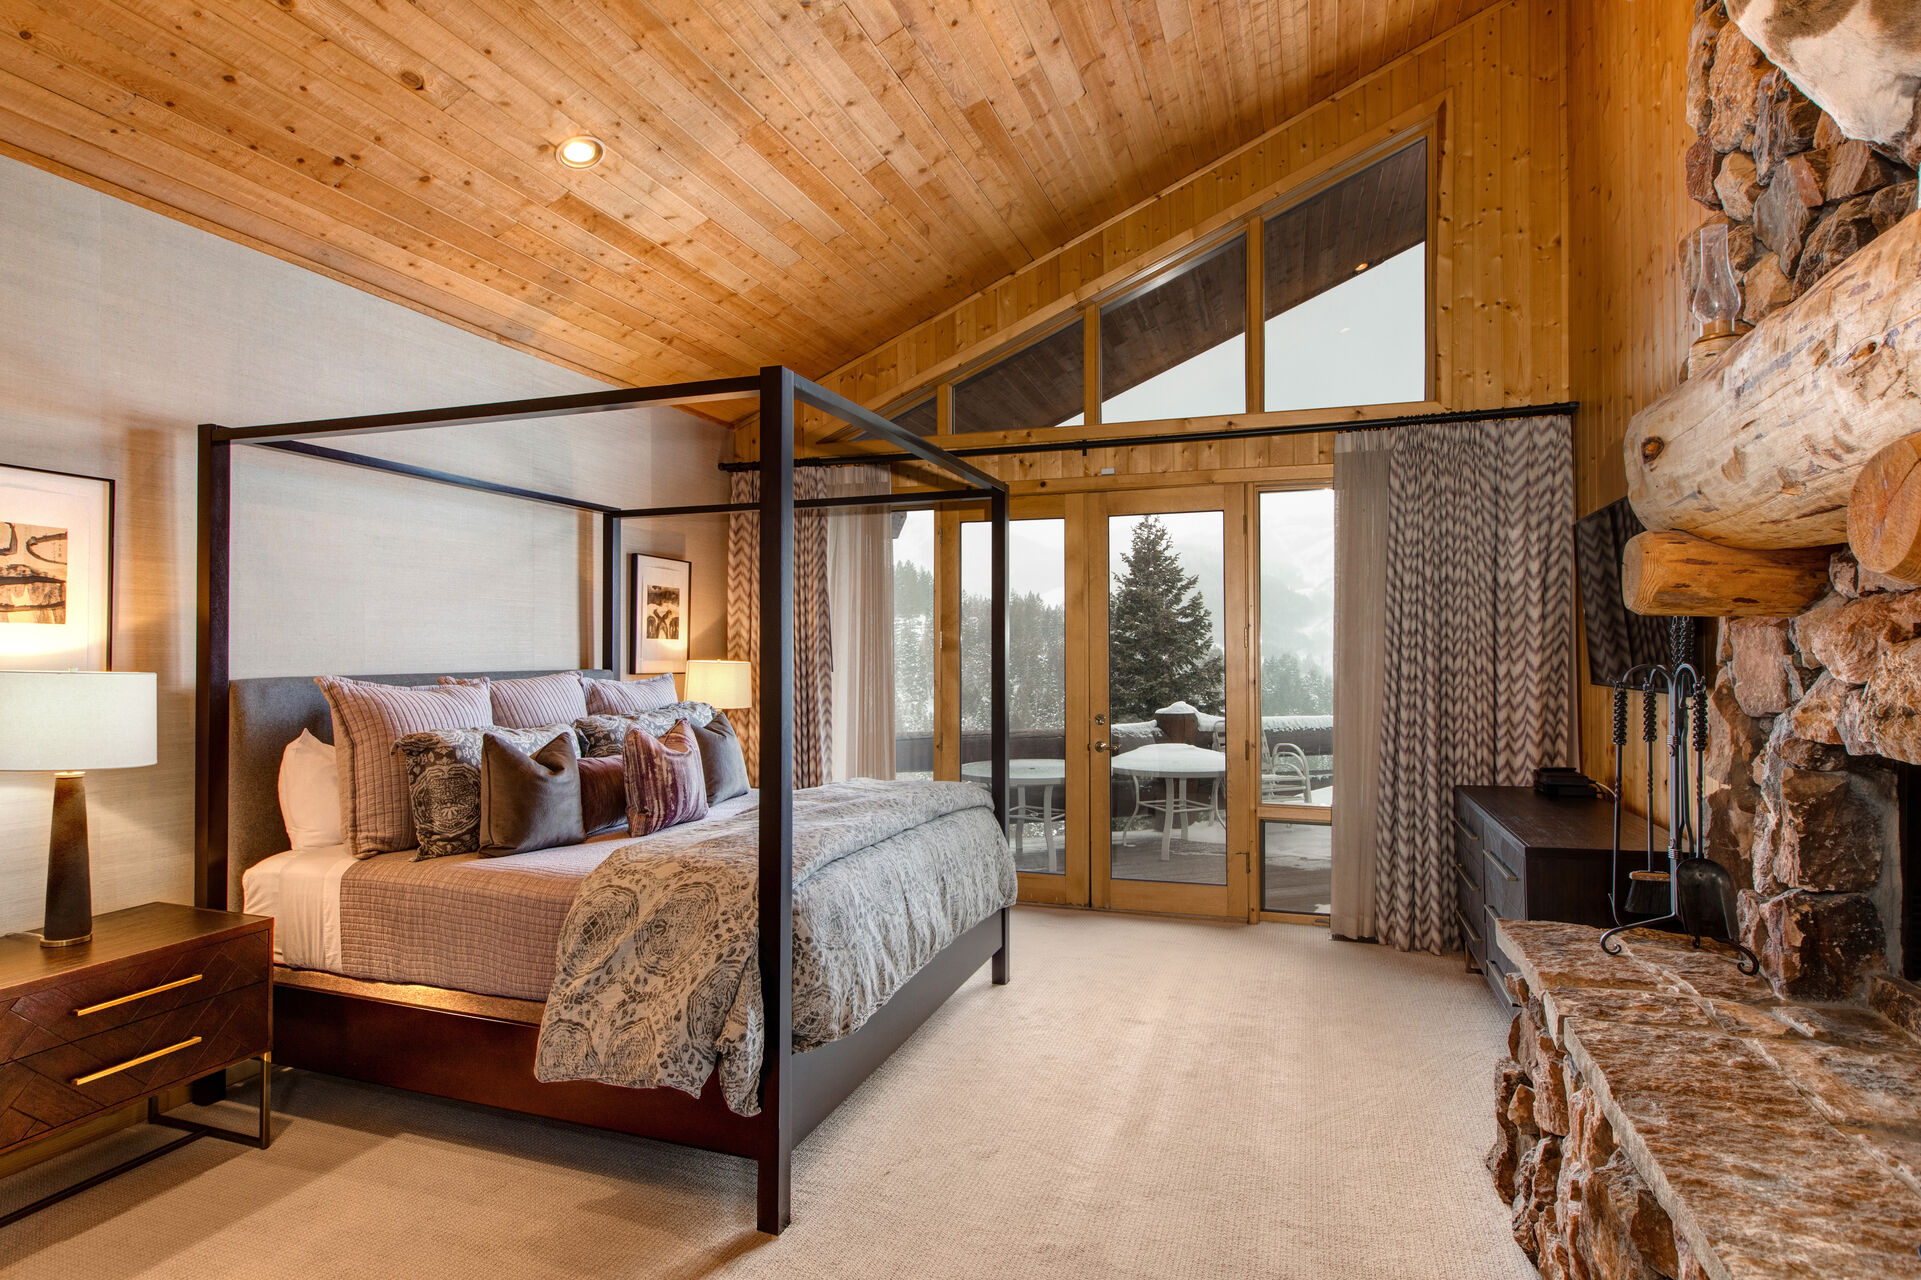 Main Level Grand Master Bedroom with a King Bed, Floor-to-Ceiling Windows, and Deck Access